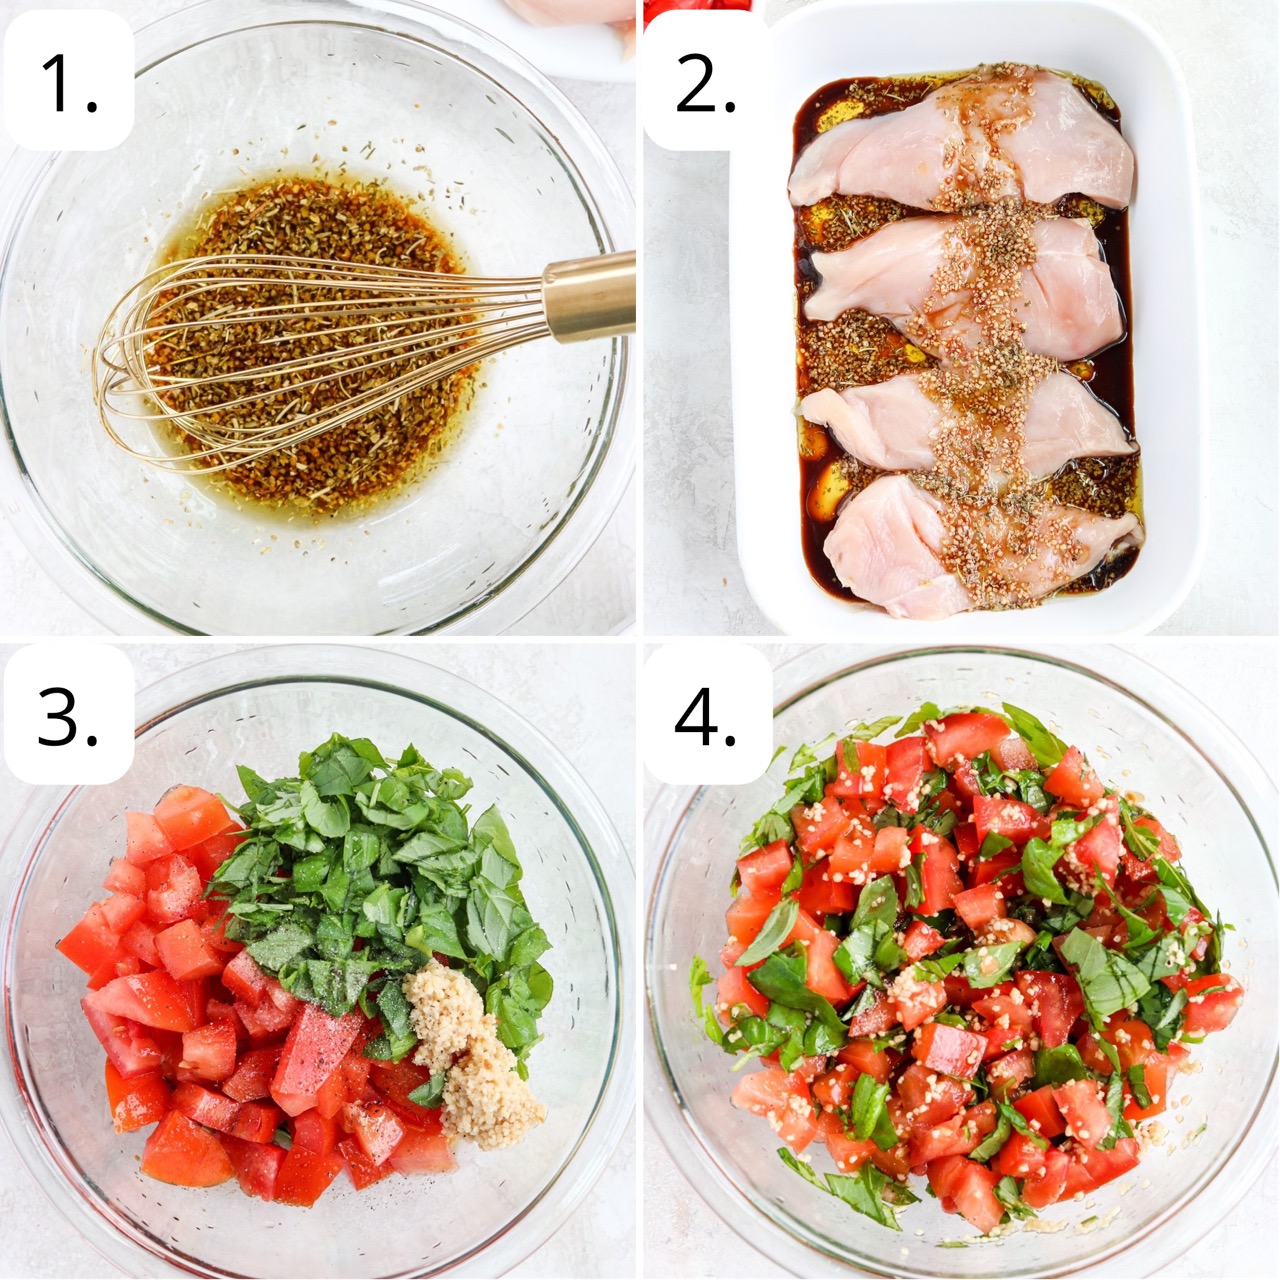 four steps to make bruschetta chicken - mix the marinade, pour it over chicken, mix up the bruschetta topping